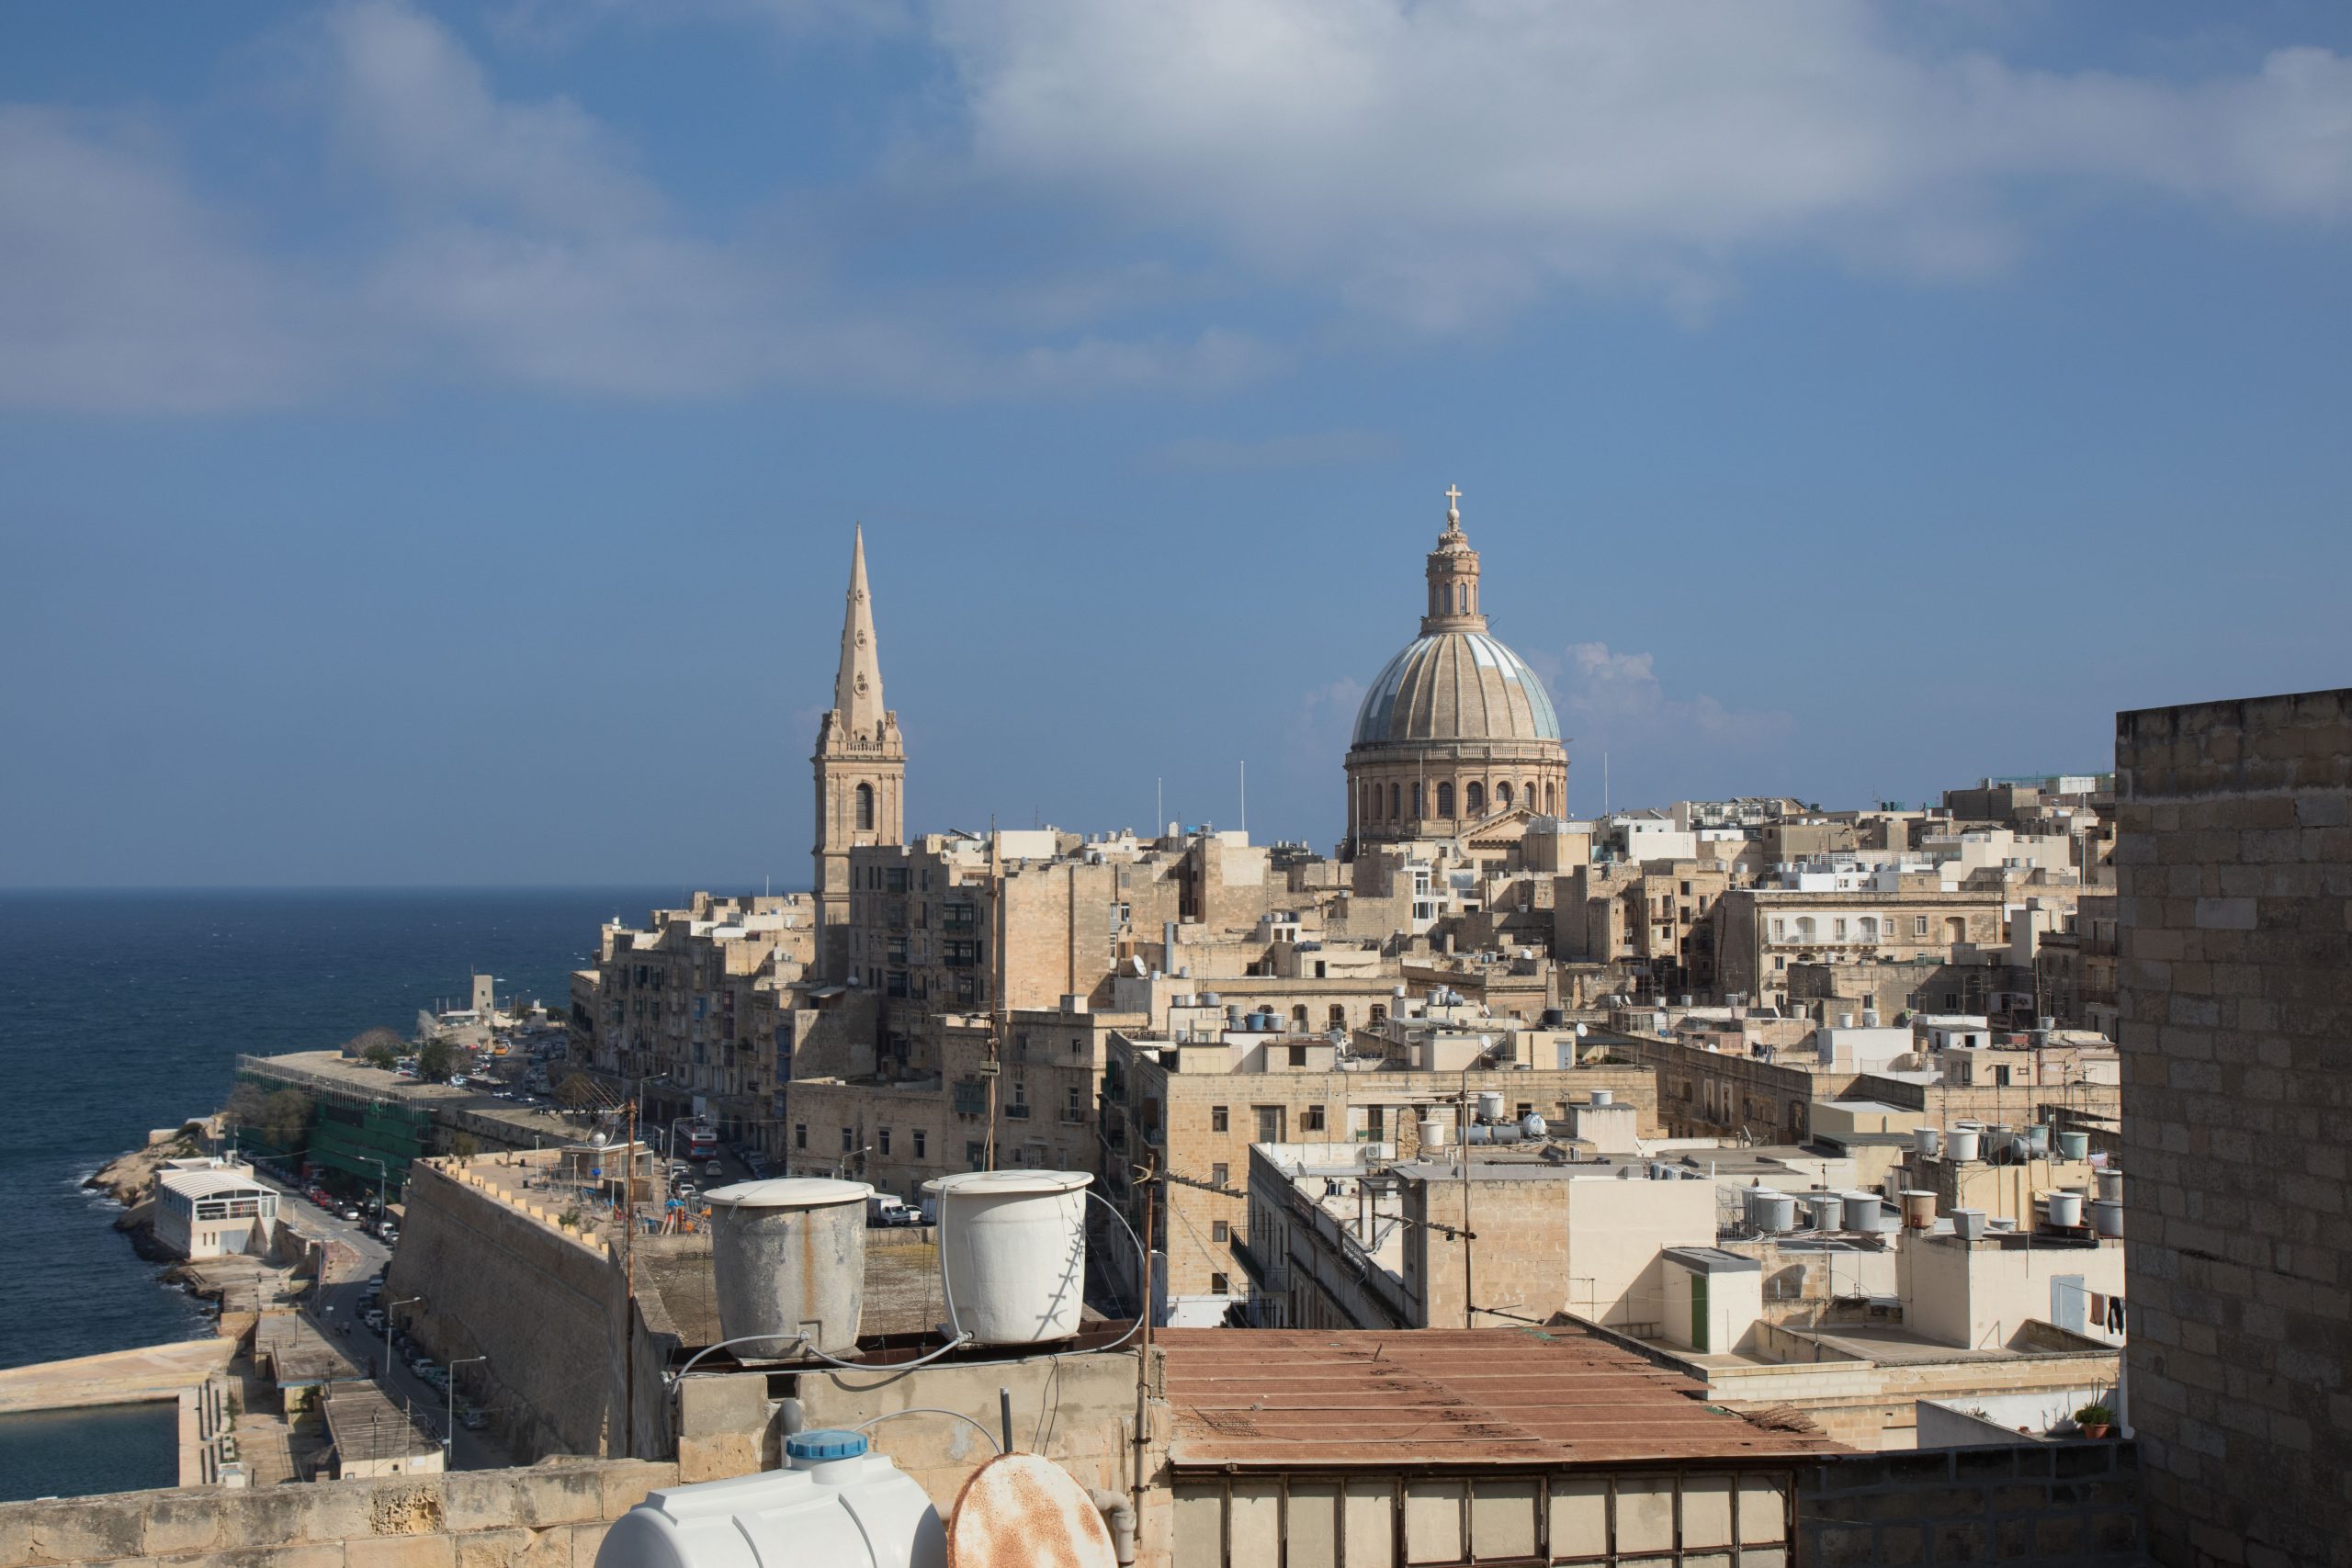 Enormous cathedrals rise above the roofs of Valletta.